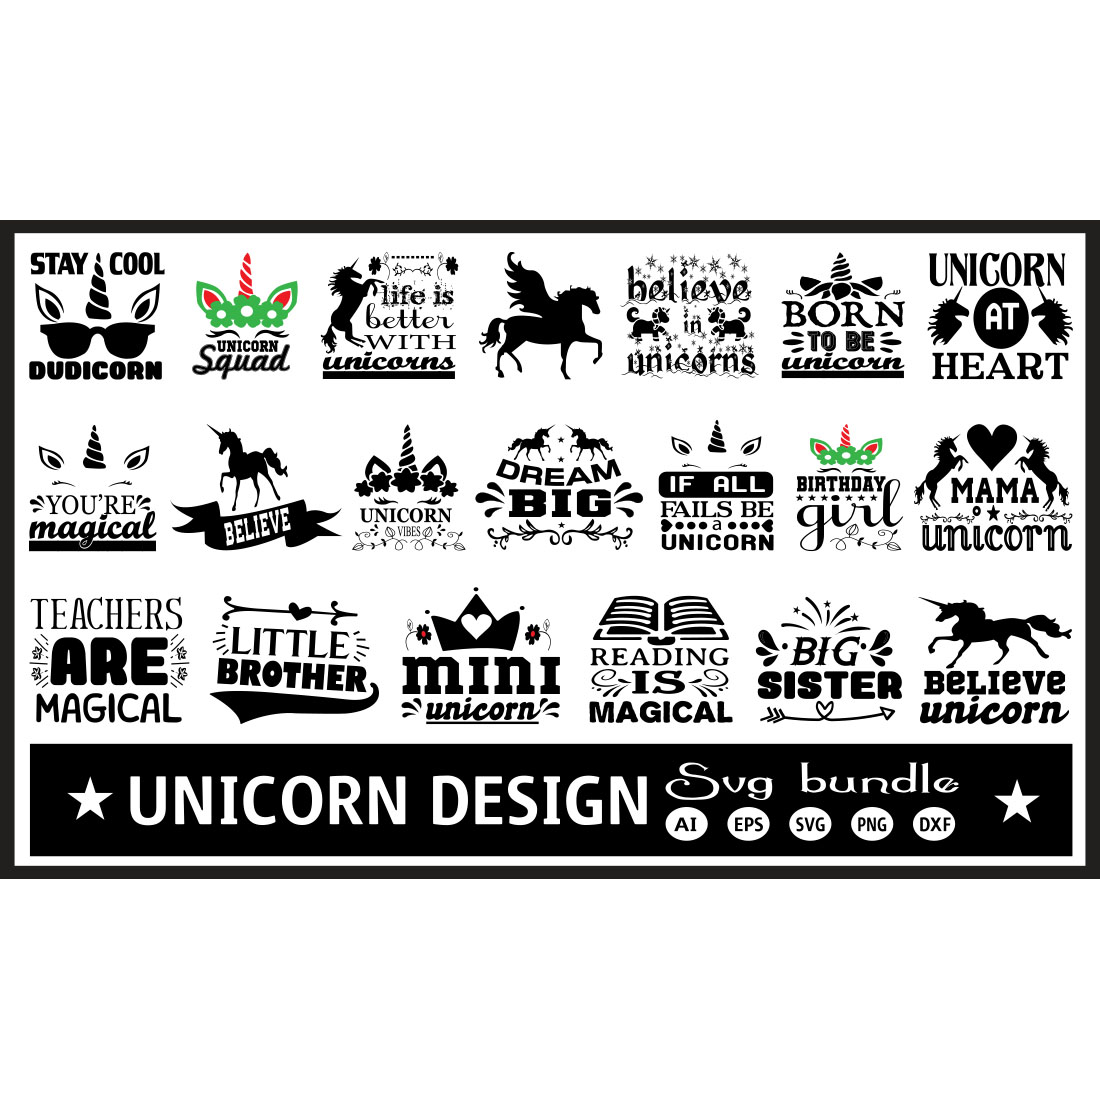 A pack of unique images for prints on the theme of unicorns